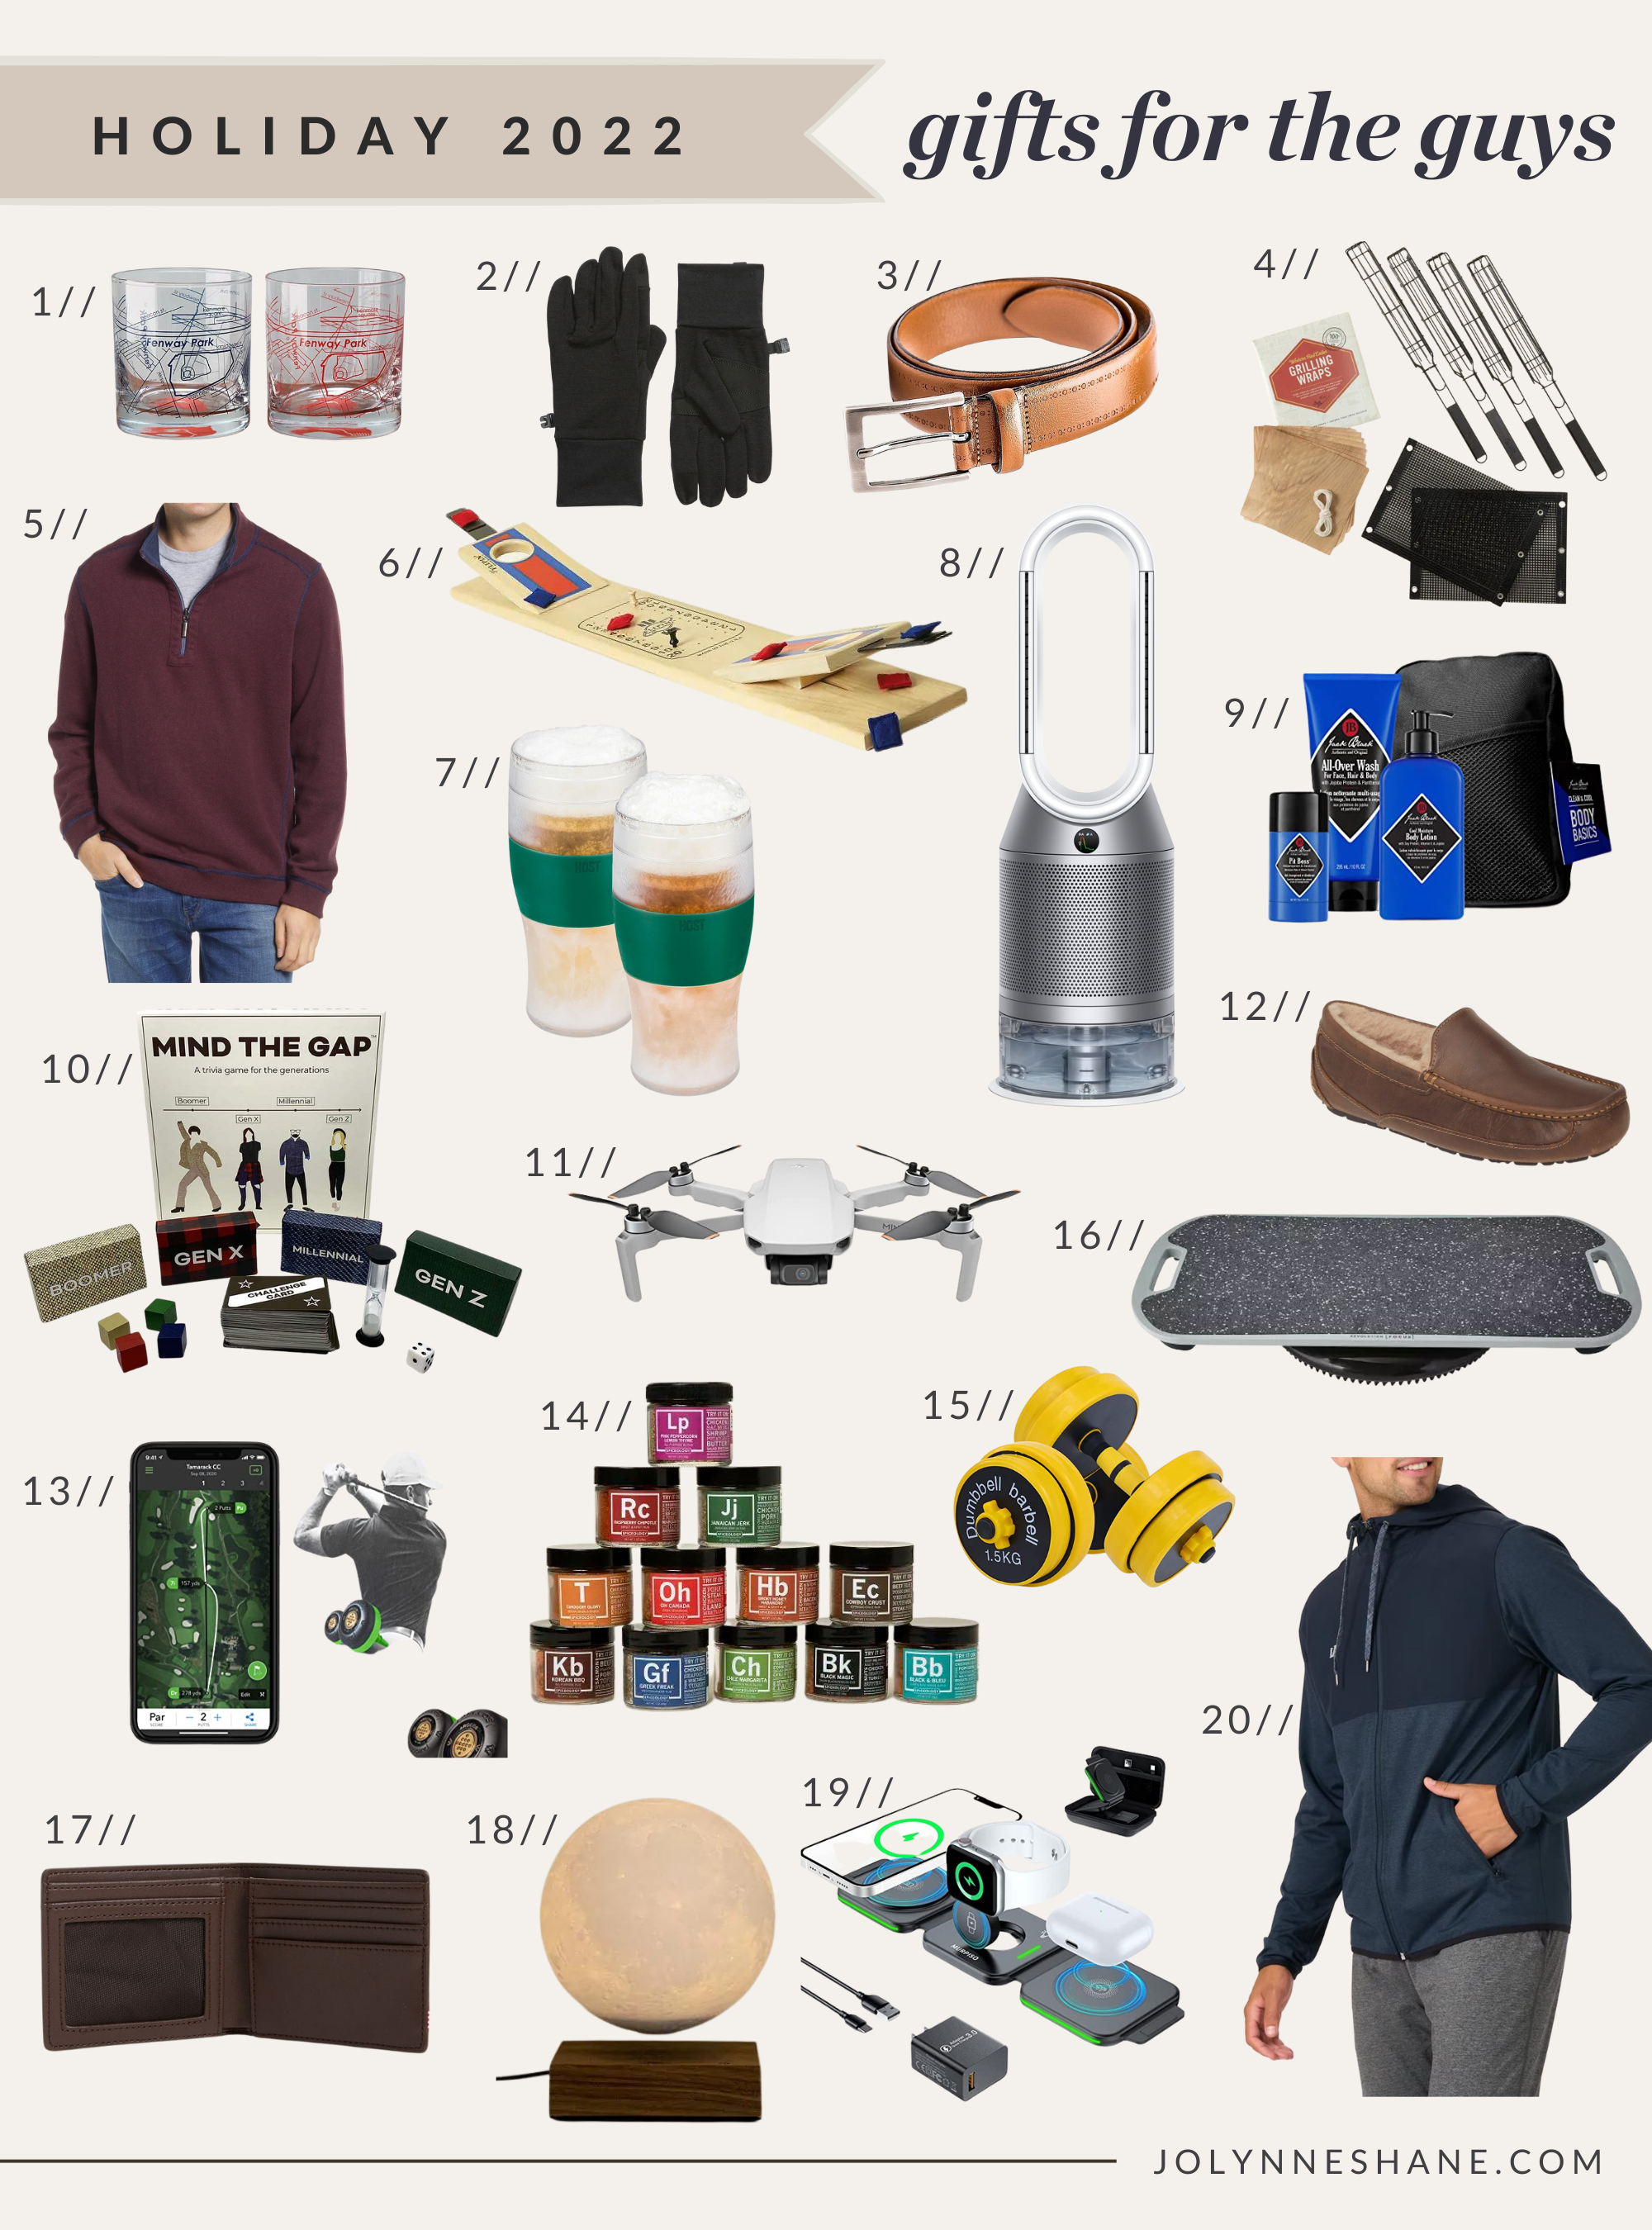 Best Christmas Gifts For Men in 2022